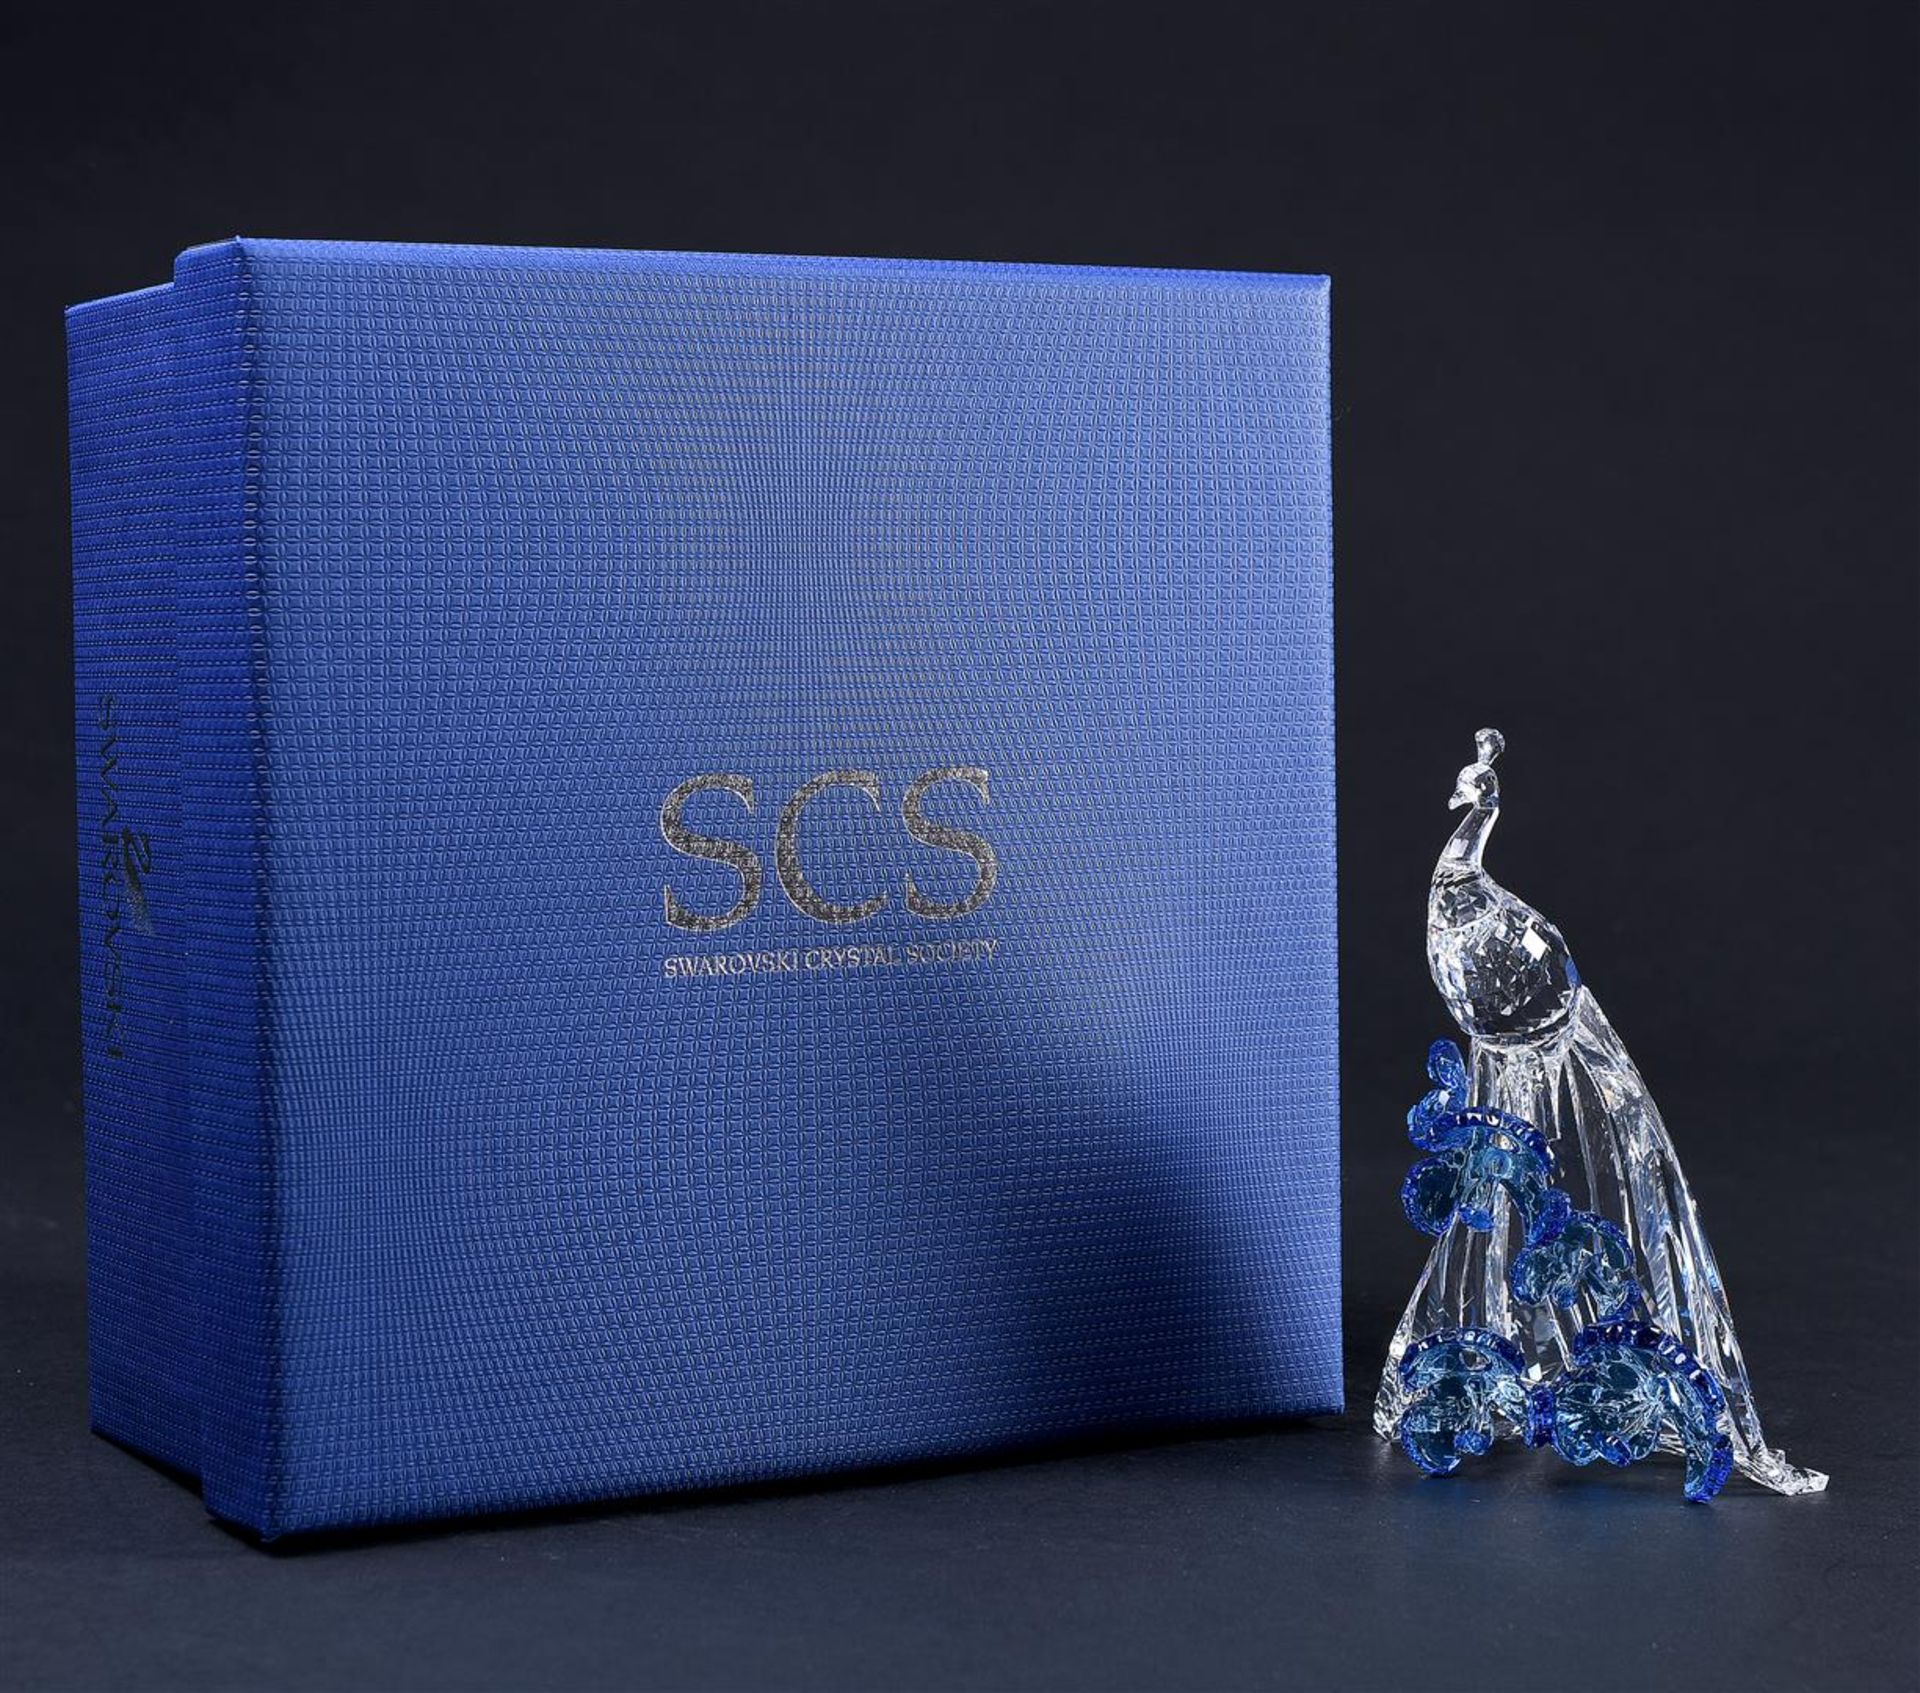 Swarovski SCS, white peacock, Year of issue 2015, 5063695. Includes original box.
8 x 12,3 x 7,5 cm. - Image 5 of 5